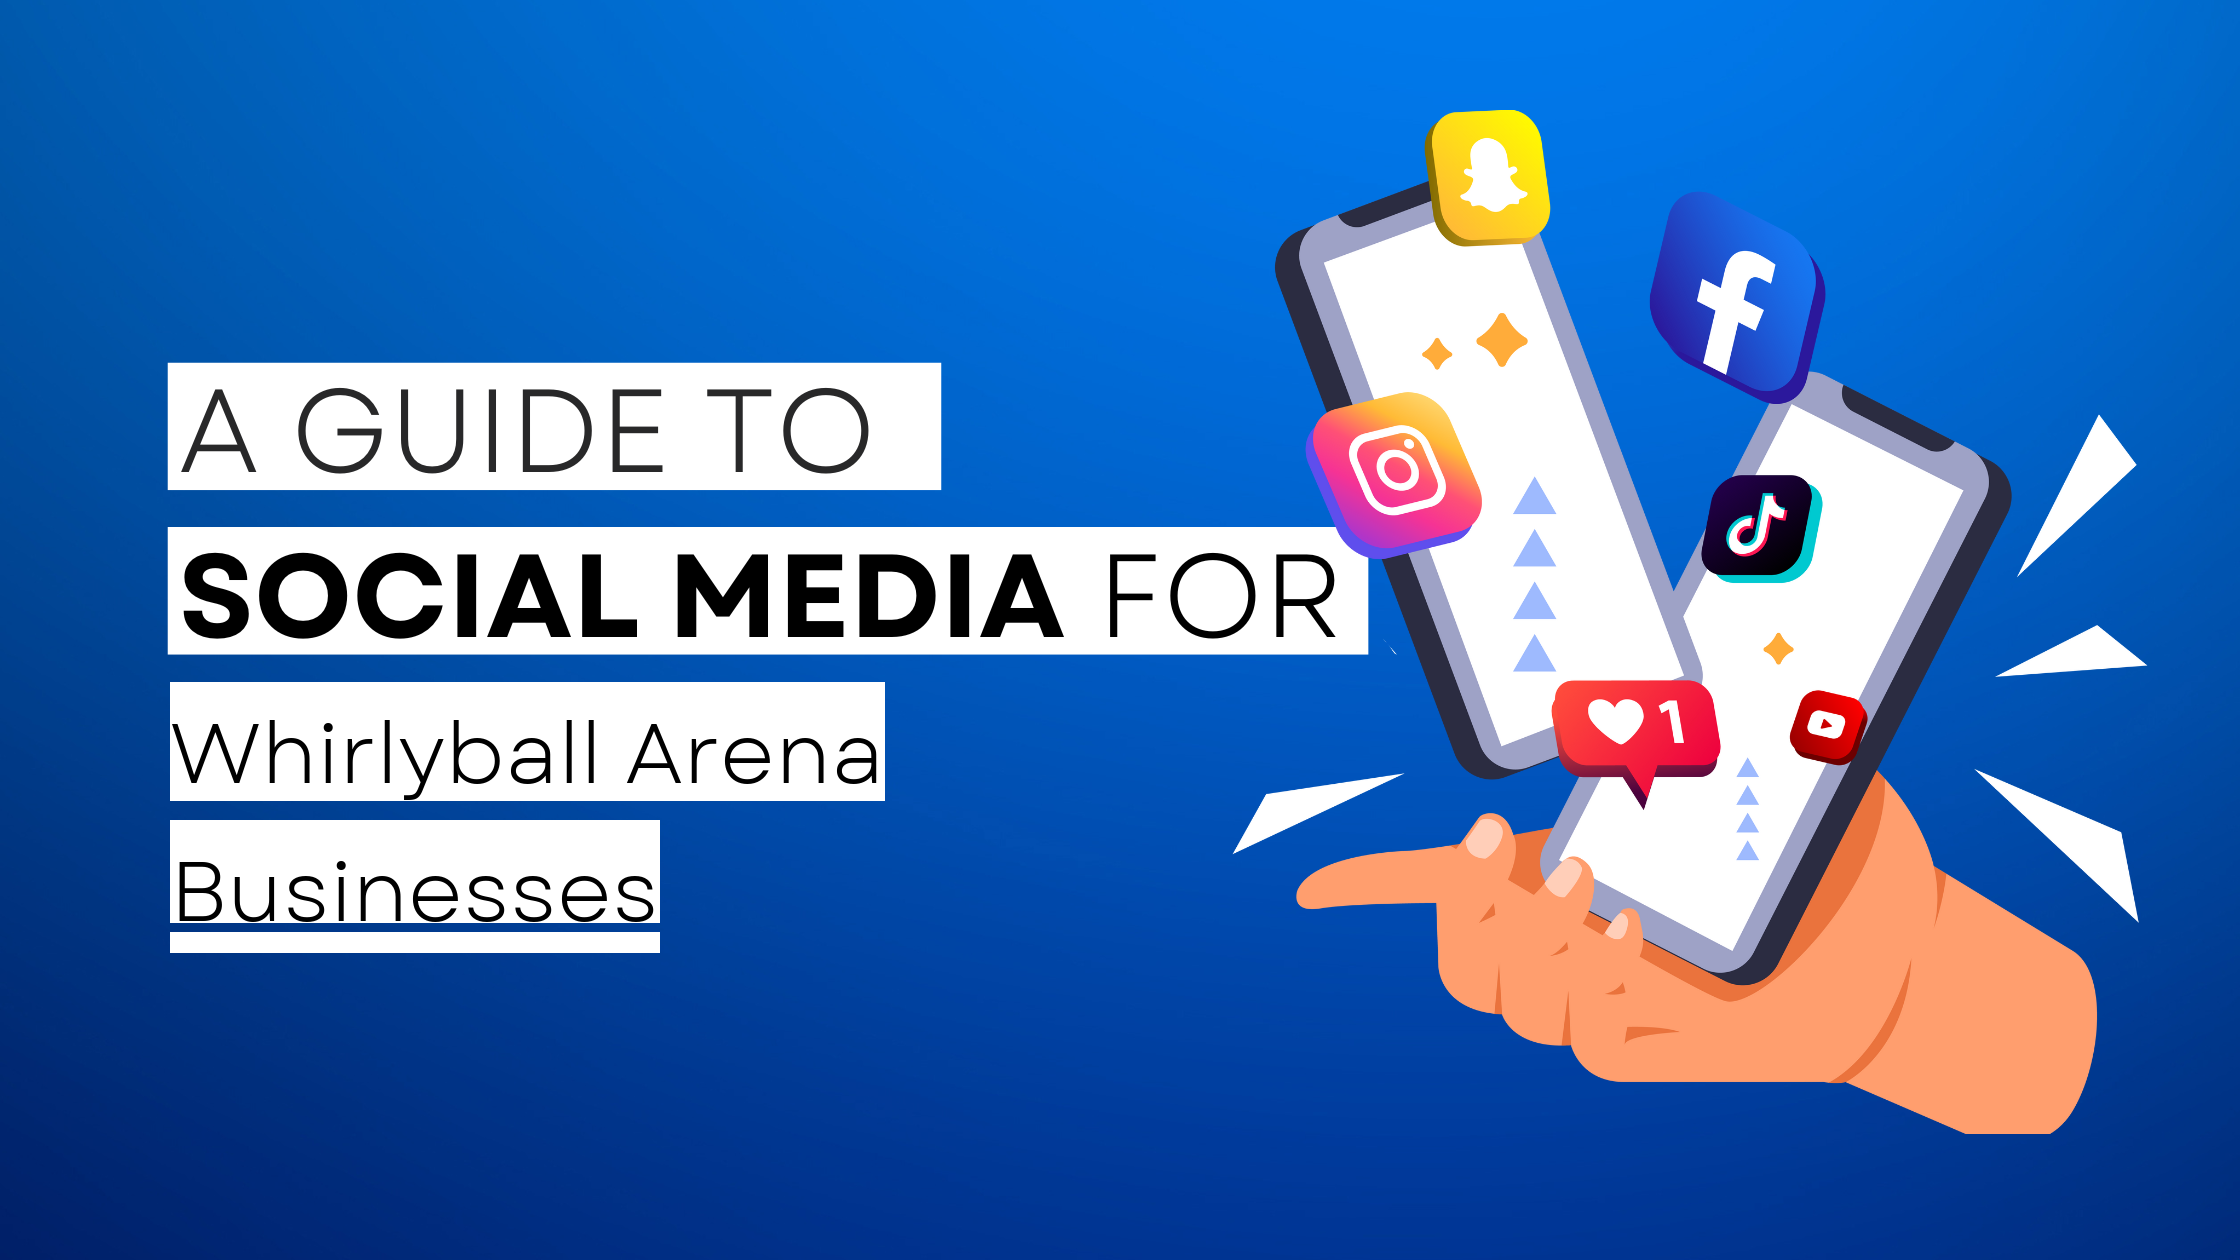 How to start Whirlyball Arena  on social media